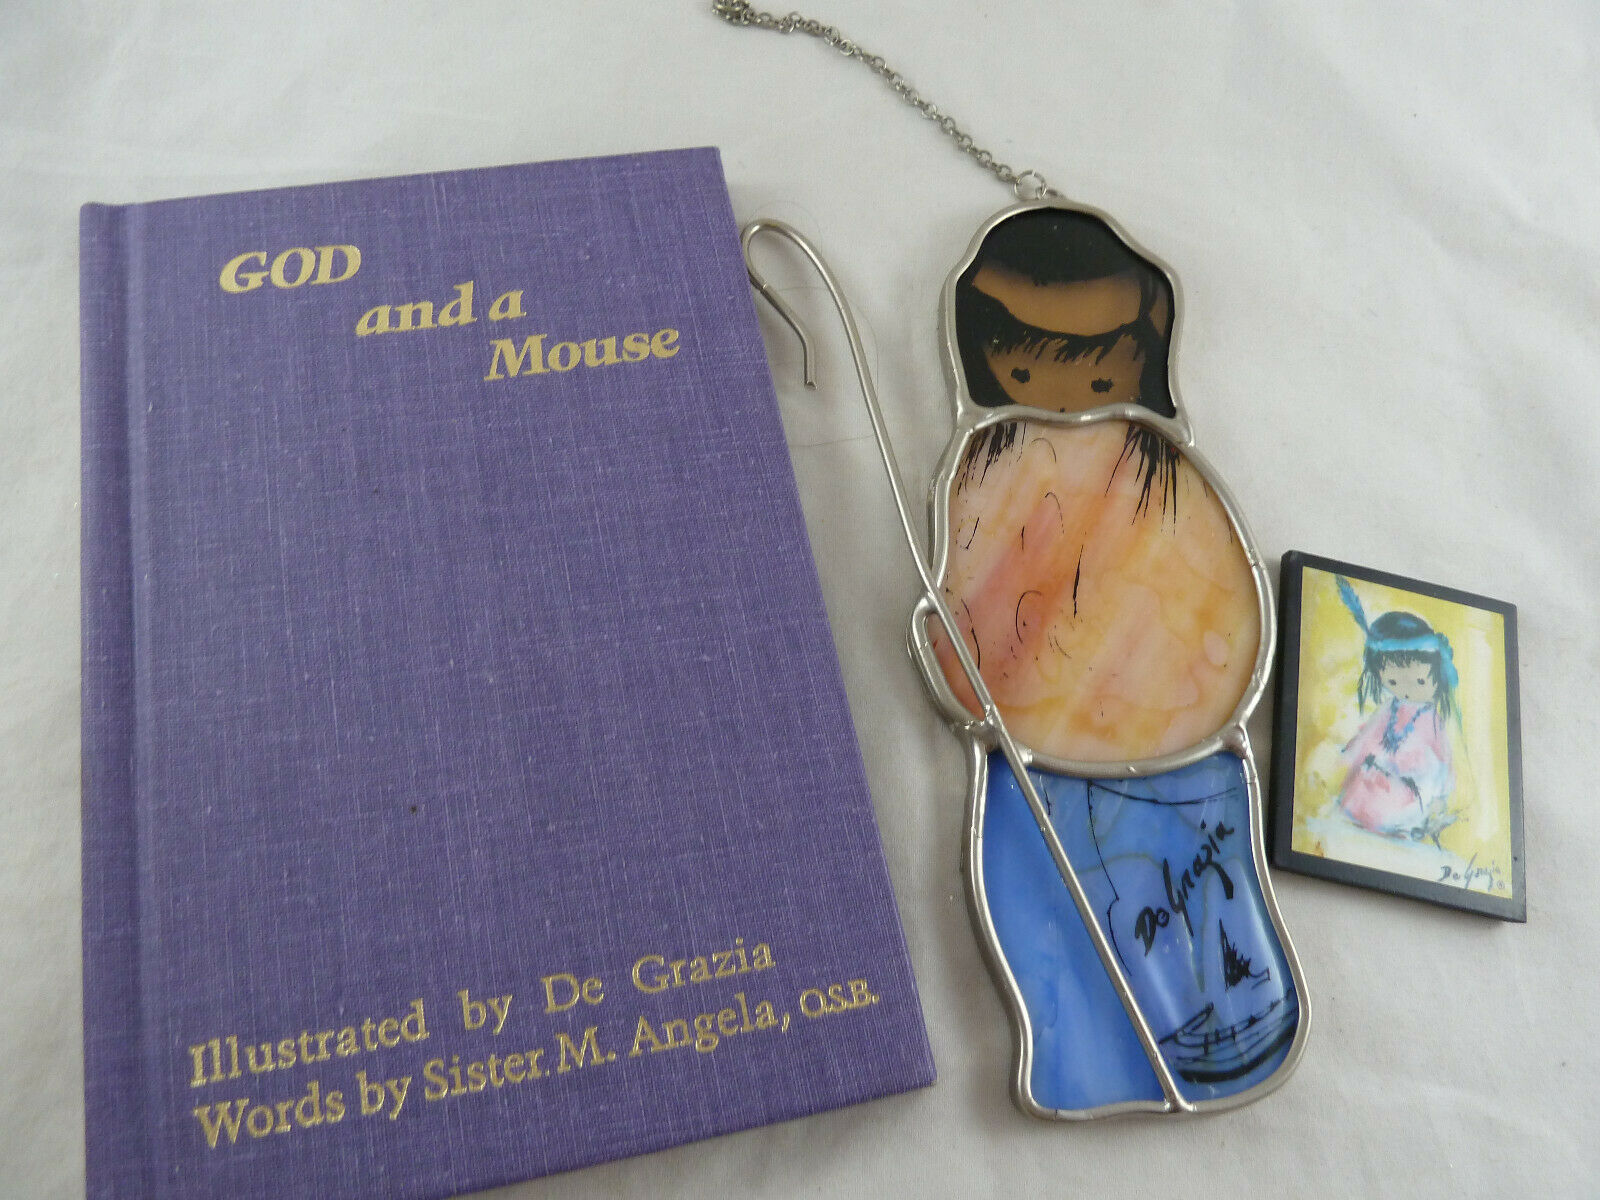 Primary image for De Grazia 6" Stained Glass Suncatcher Shepherd, Book God and Mouse & Magnet lot